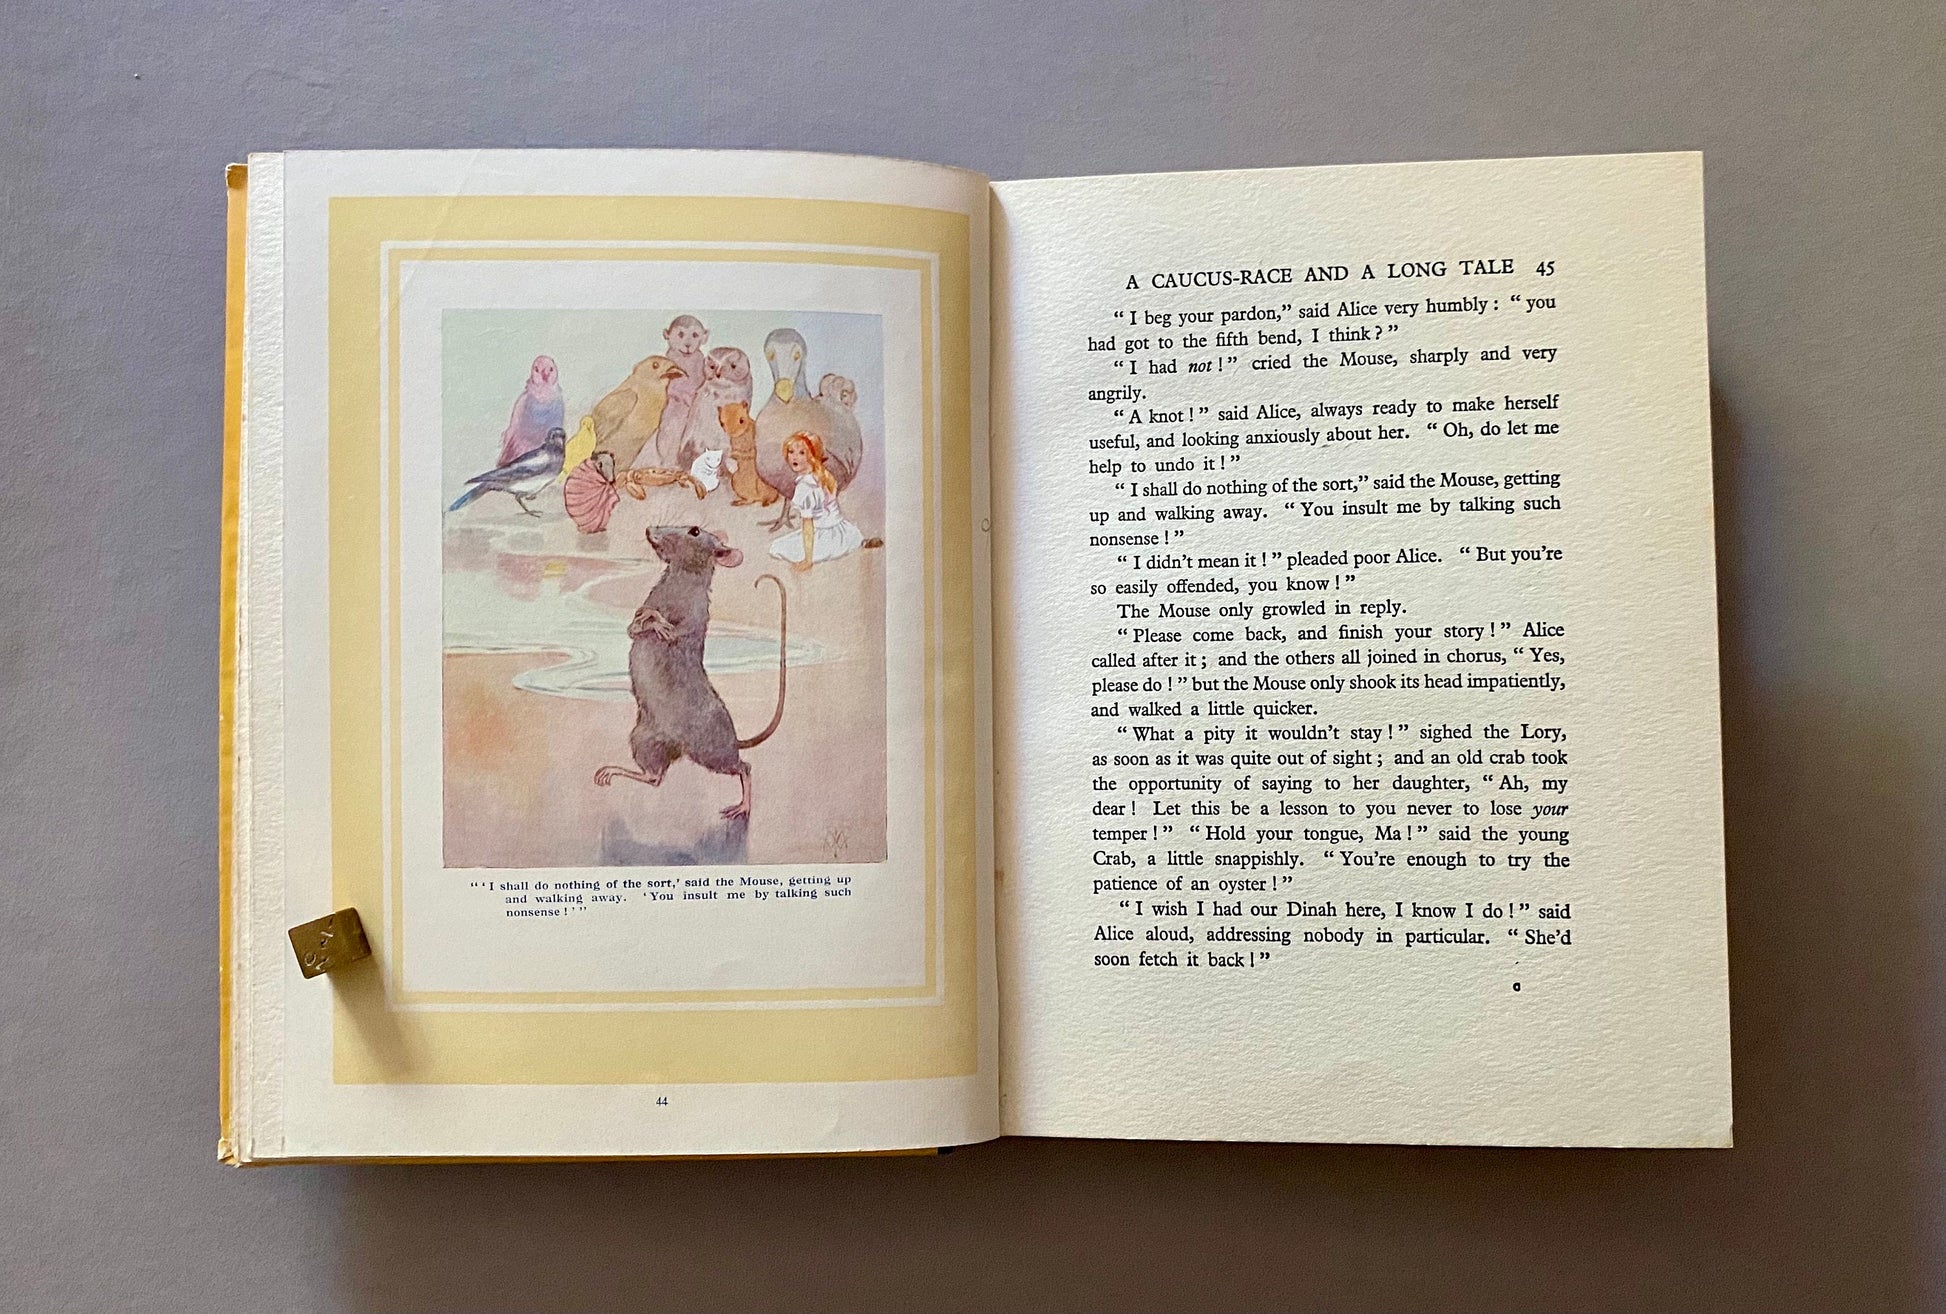 Alice’s Adventures in Wonderland. By Lewis Carroll. With 24 Colour Plates by Margaret W. Tarrant. Ward, Lock & Co. Published in the 1920s.